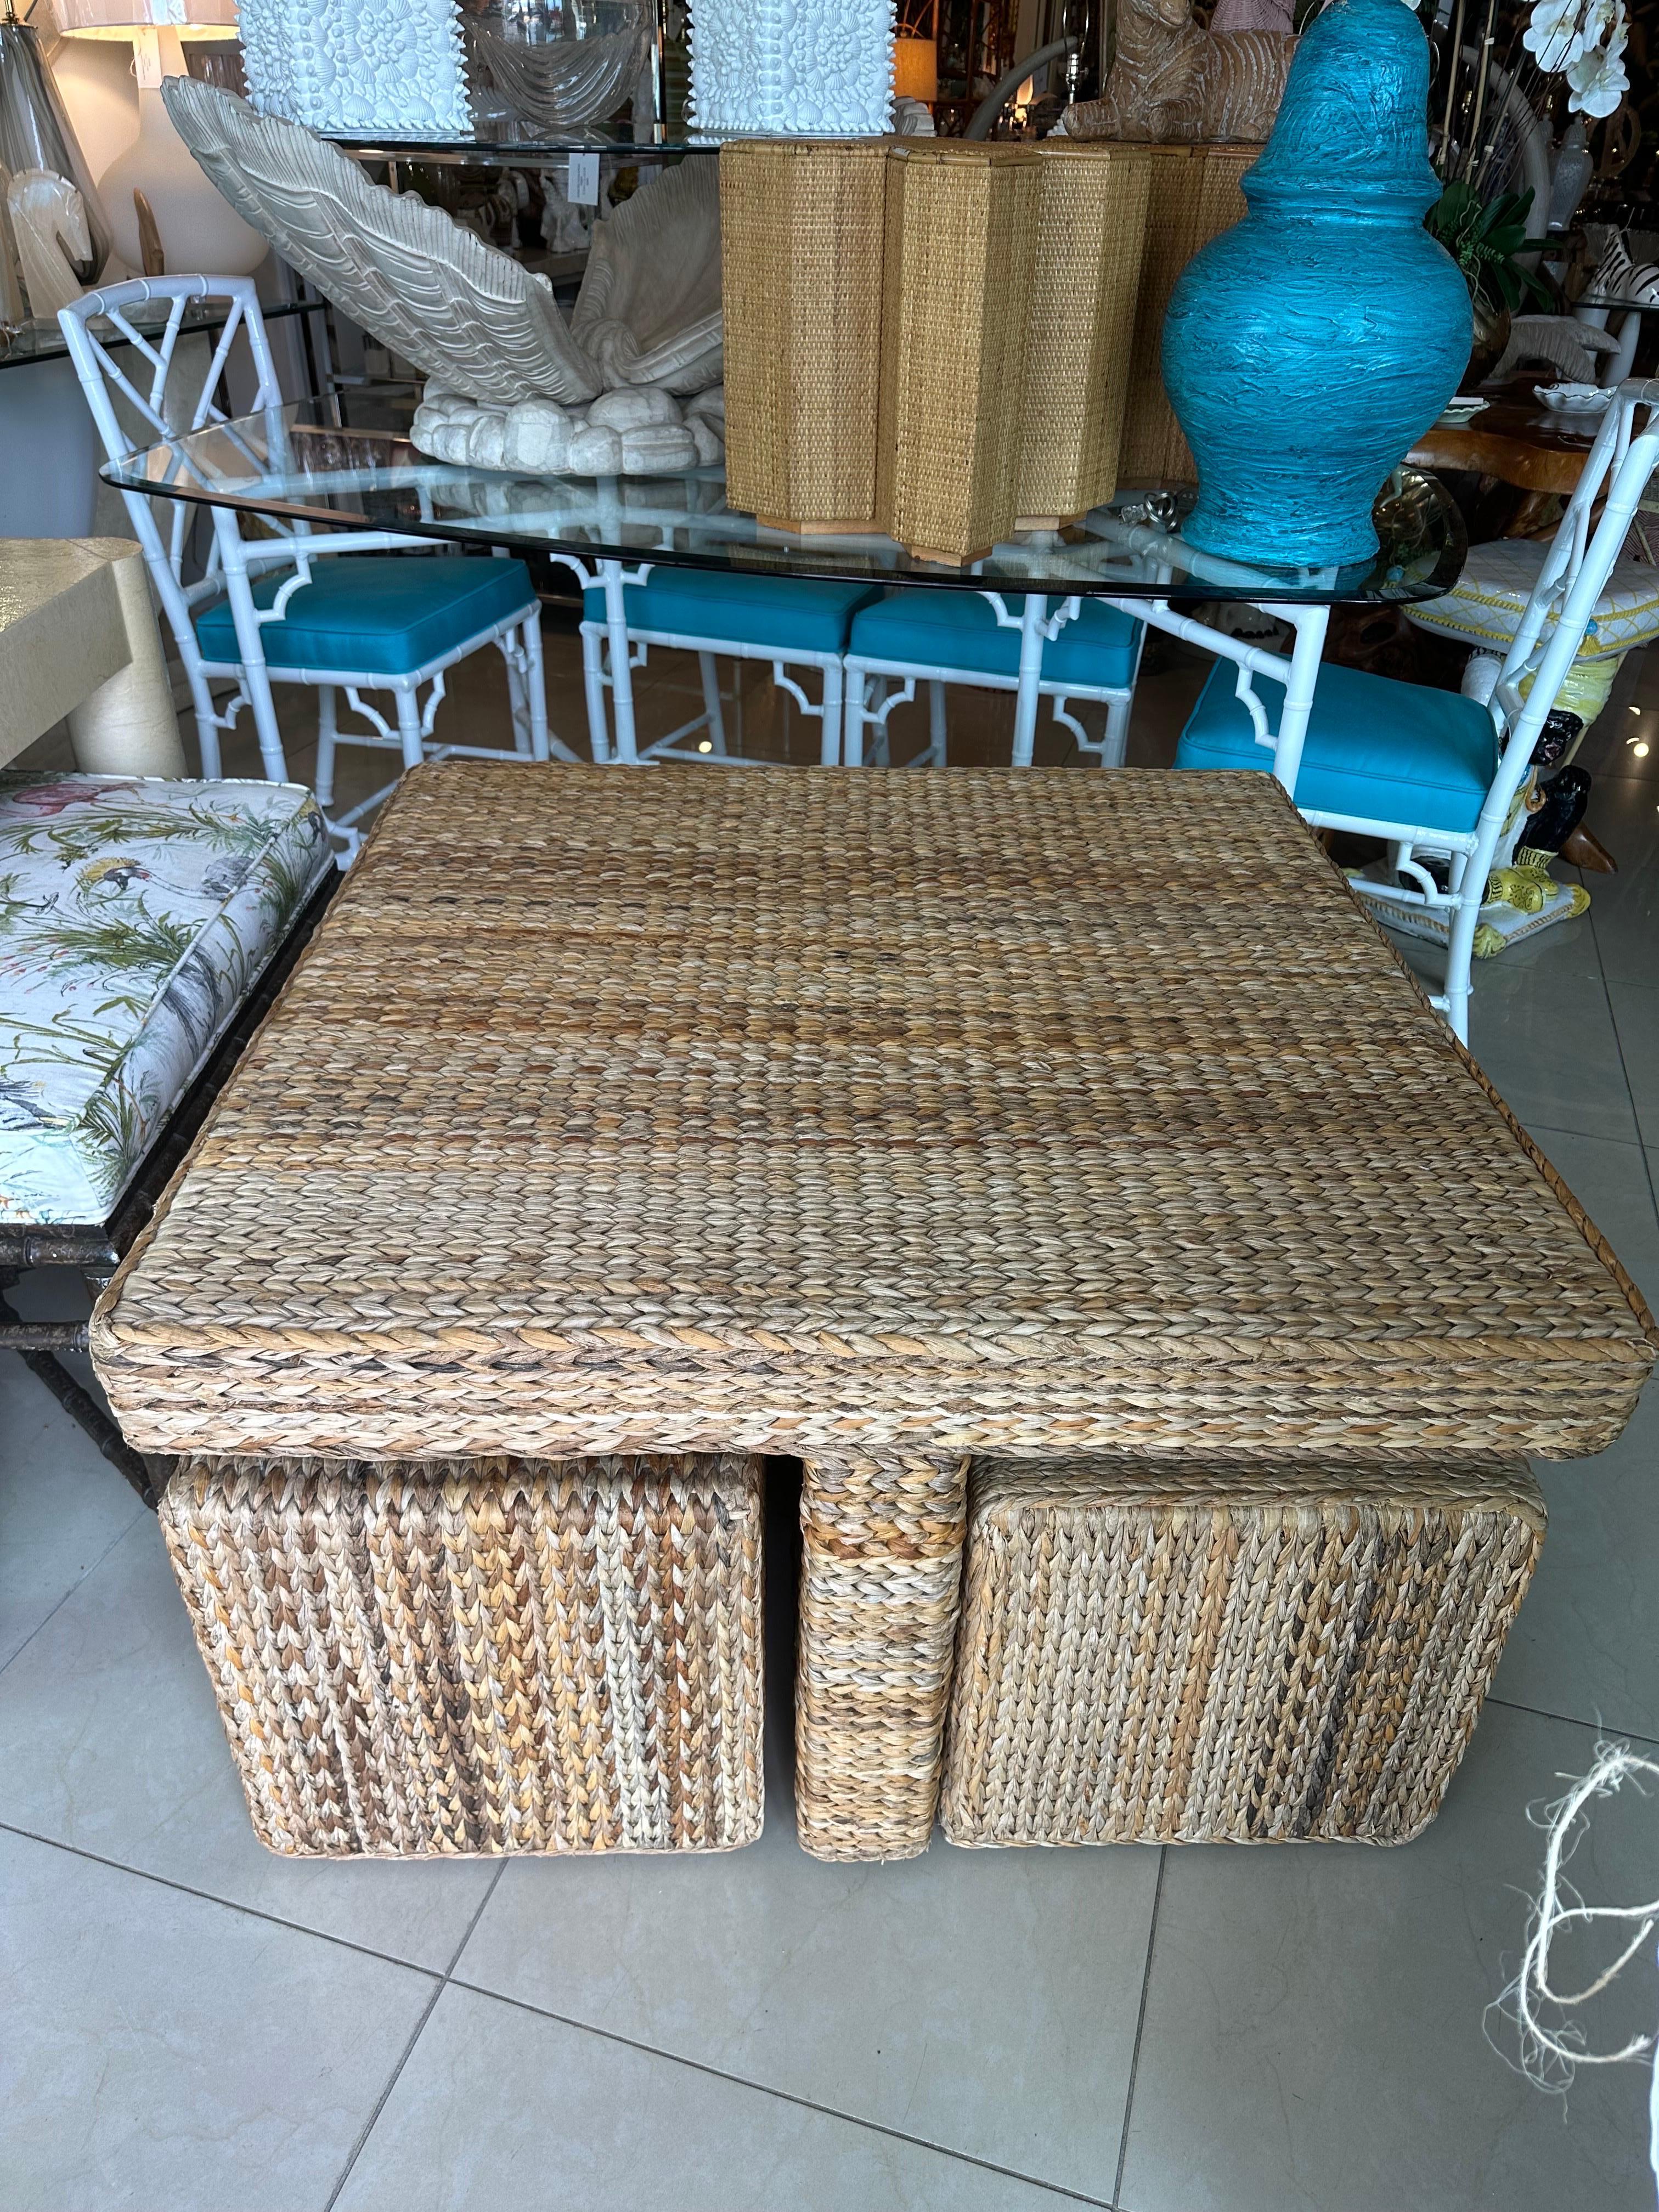 Wonderful vintage seagrass coffee cocktail table with 4 benches stools that tuck underneath for storage. Such a great space saver! Benches and coffee table have new feet/bumpers put on. No damage. Table dimensions: 22 H x 38 W x 38 D. Benches